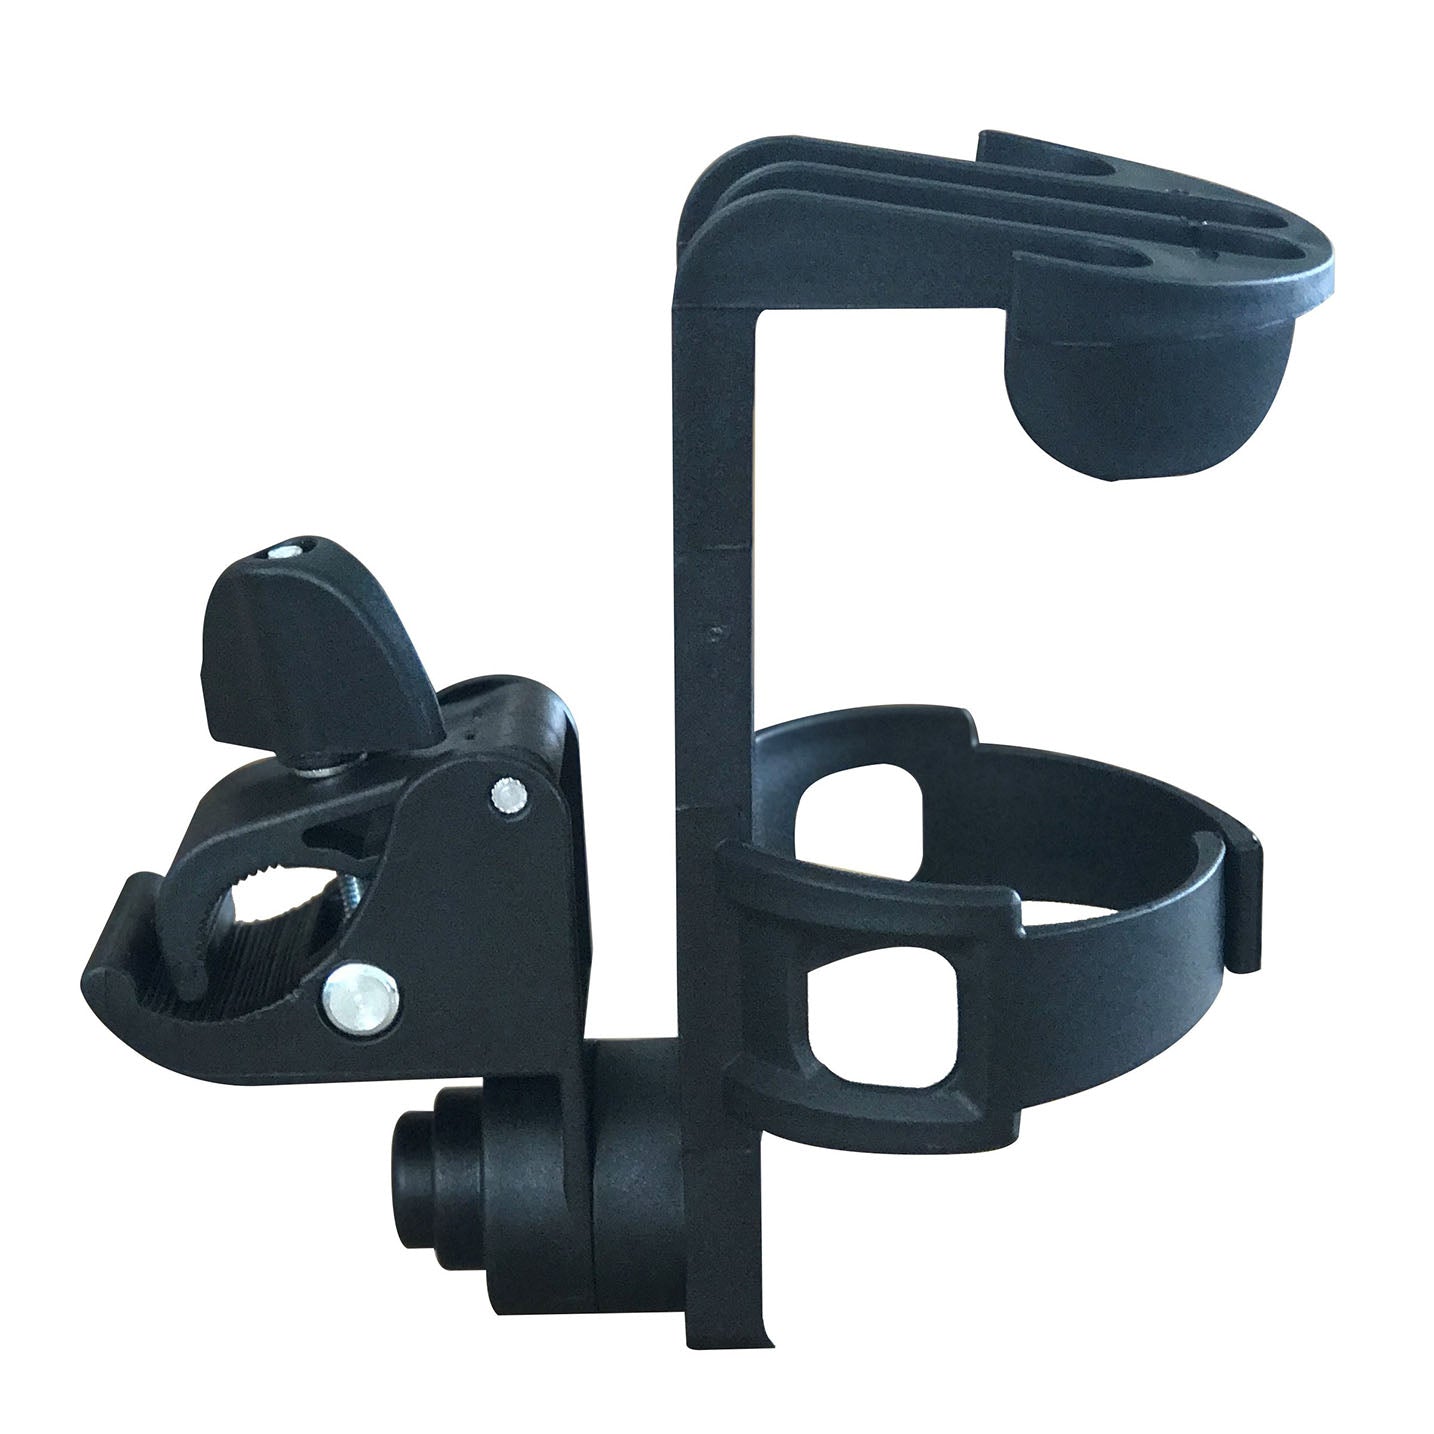 The Universal Drink Holder will hold every kind of wine glass, coffee cup,  cans and bottles. The drink holder is compatible with many various  wheelchairs, power chairs, electric wheelchairs, mobility scooters, and